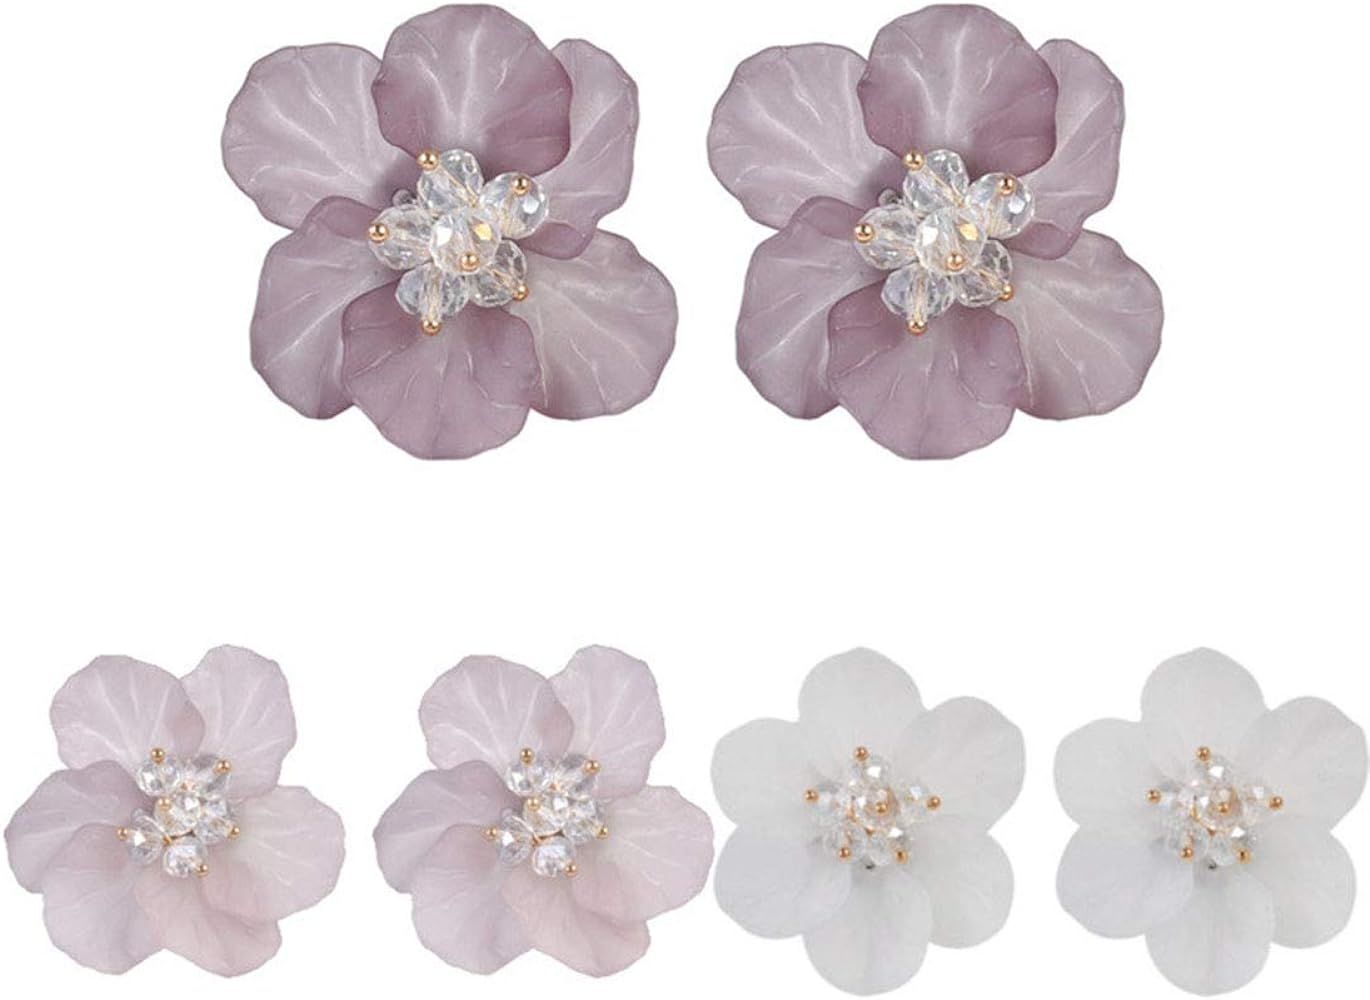 Cute Acrylic Resin Petals White Beads Flower Stud Earrings Floral Statement Women Girls Gifts | Amazon (US)